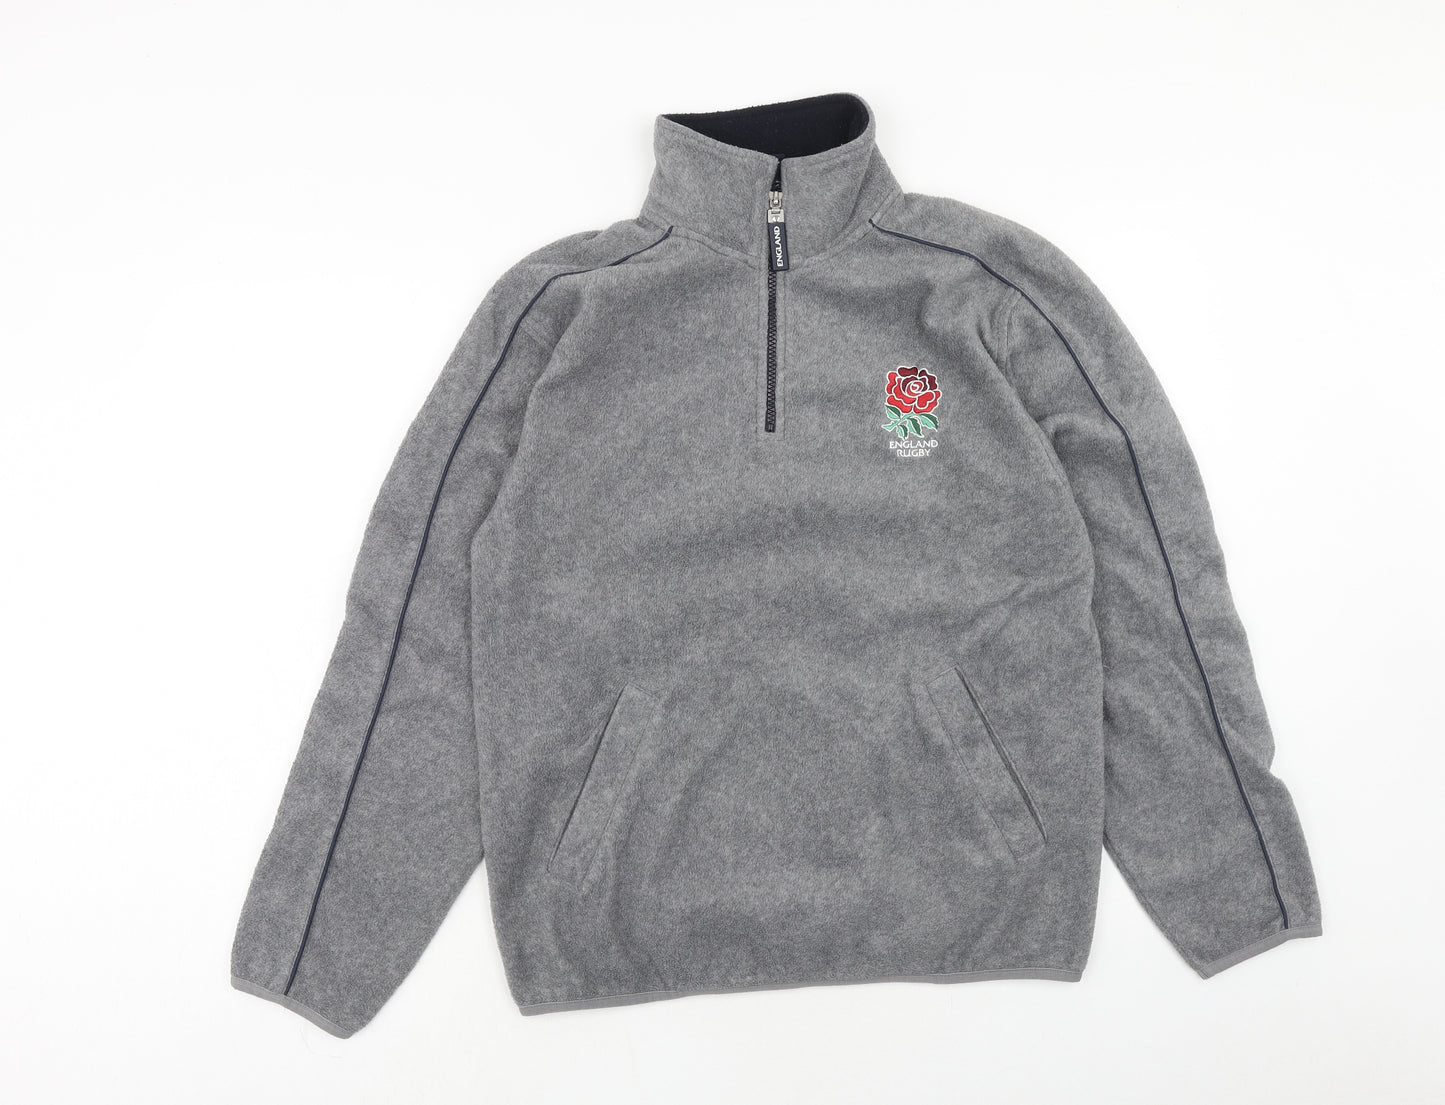 England Rugby Mens Grey Polyester Pullover Sweatshirt Size S Zip